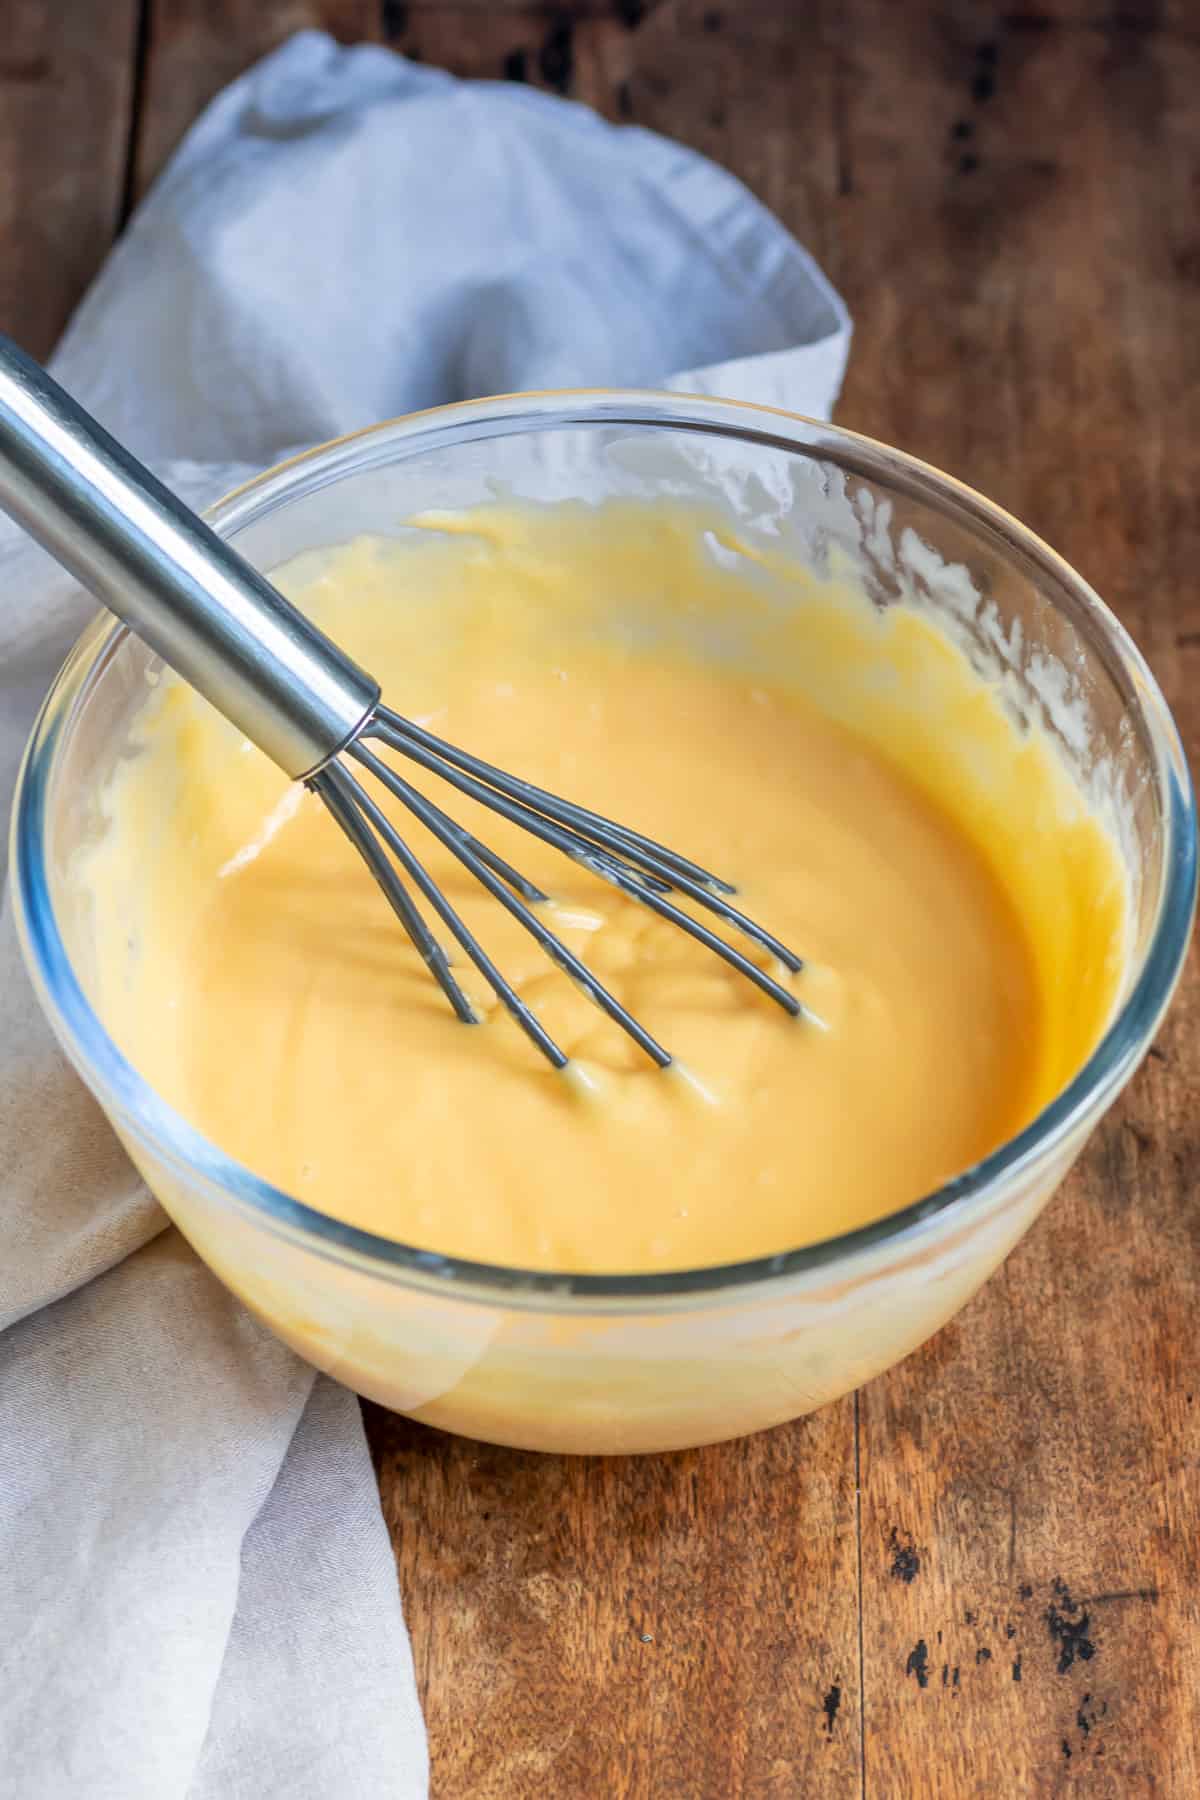 Whisk in a bowl of cheese sauce.